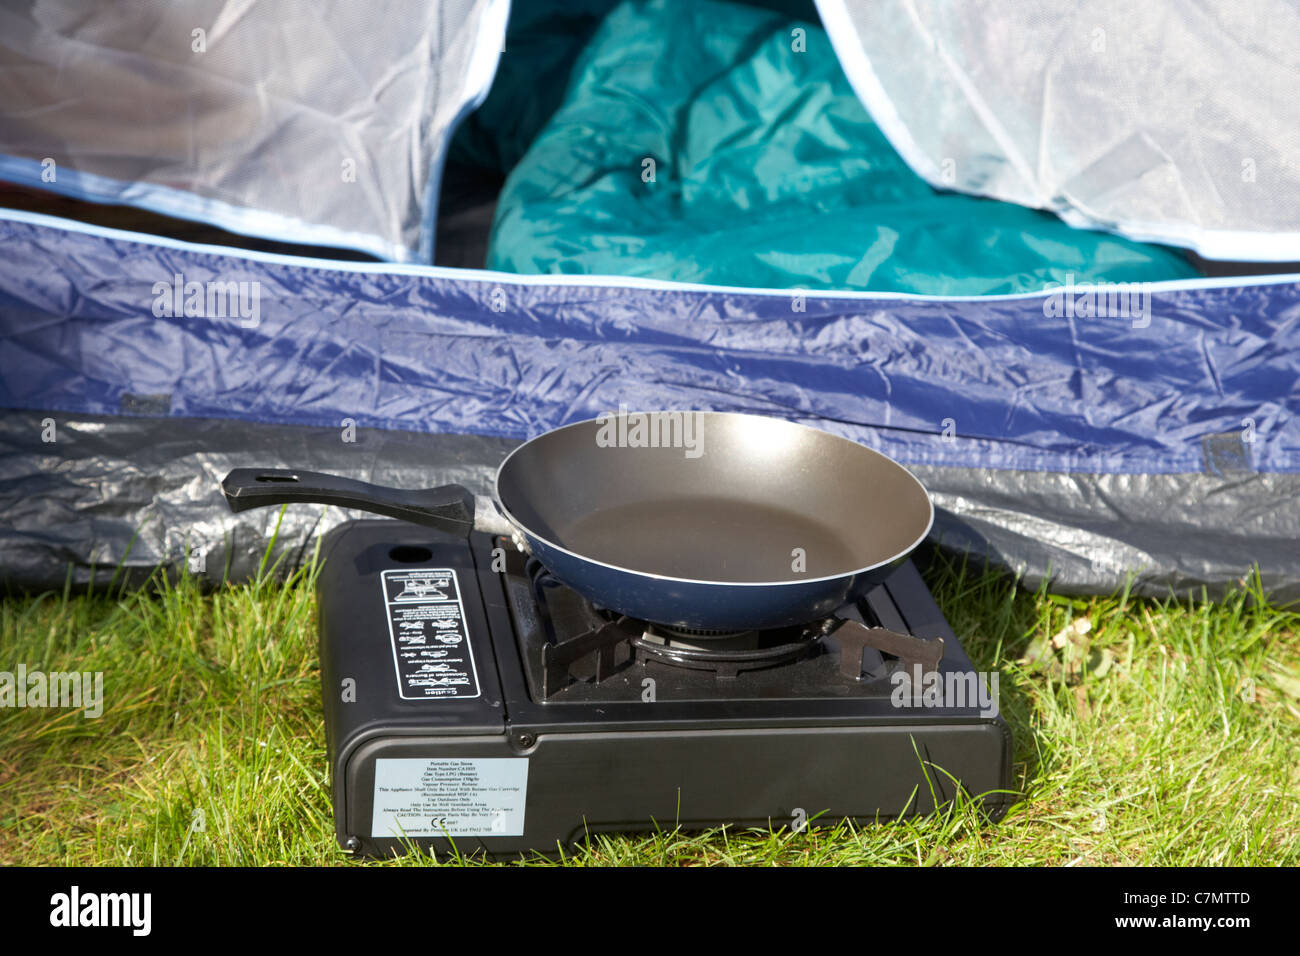 Camping gaz cooker (steel and plastic), gas cylinder (pressed steel) and  camping saucepans (aluminium and plastic Stock Photo - Alamy